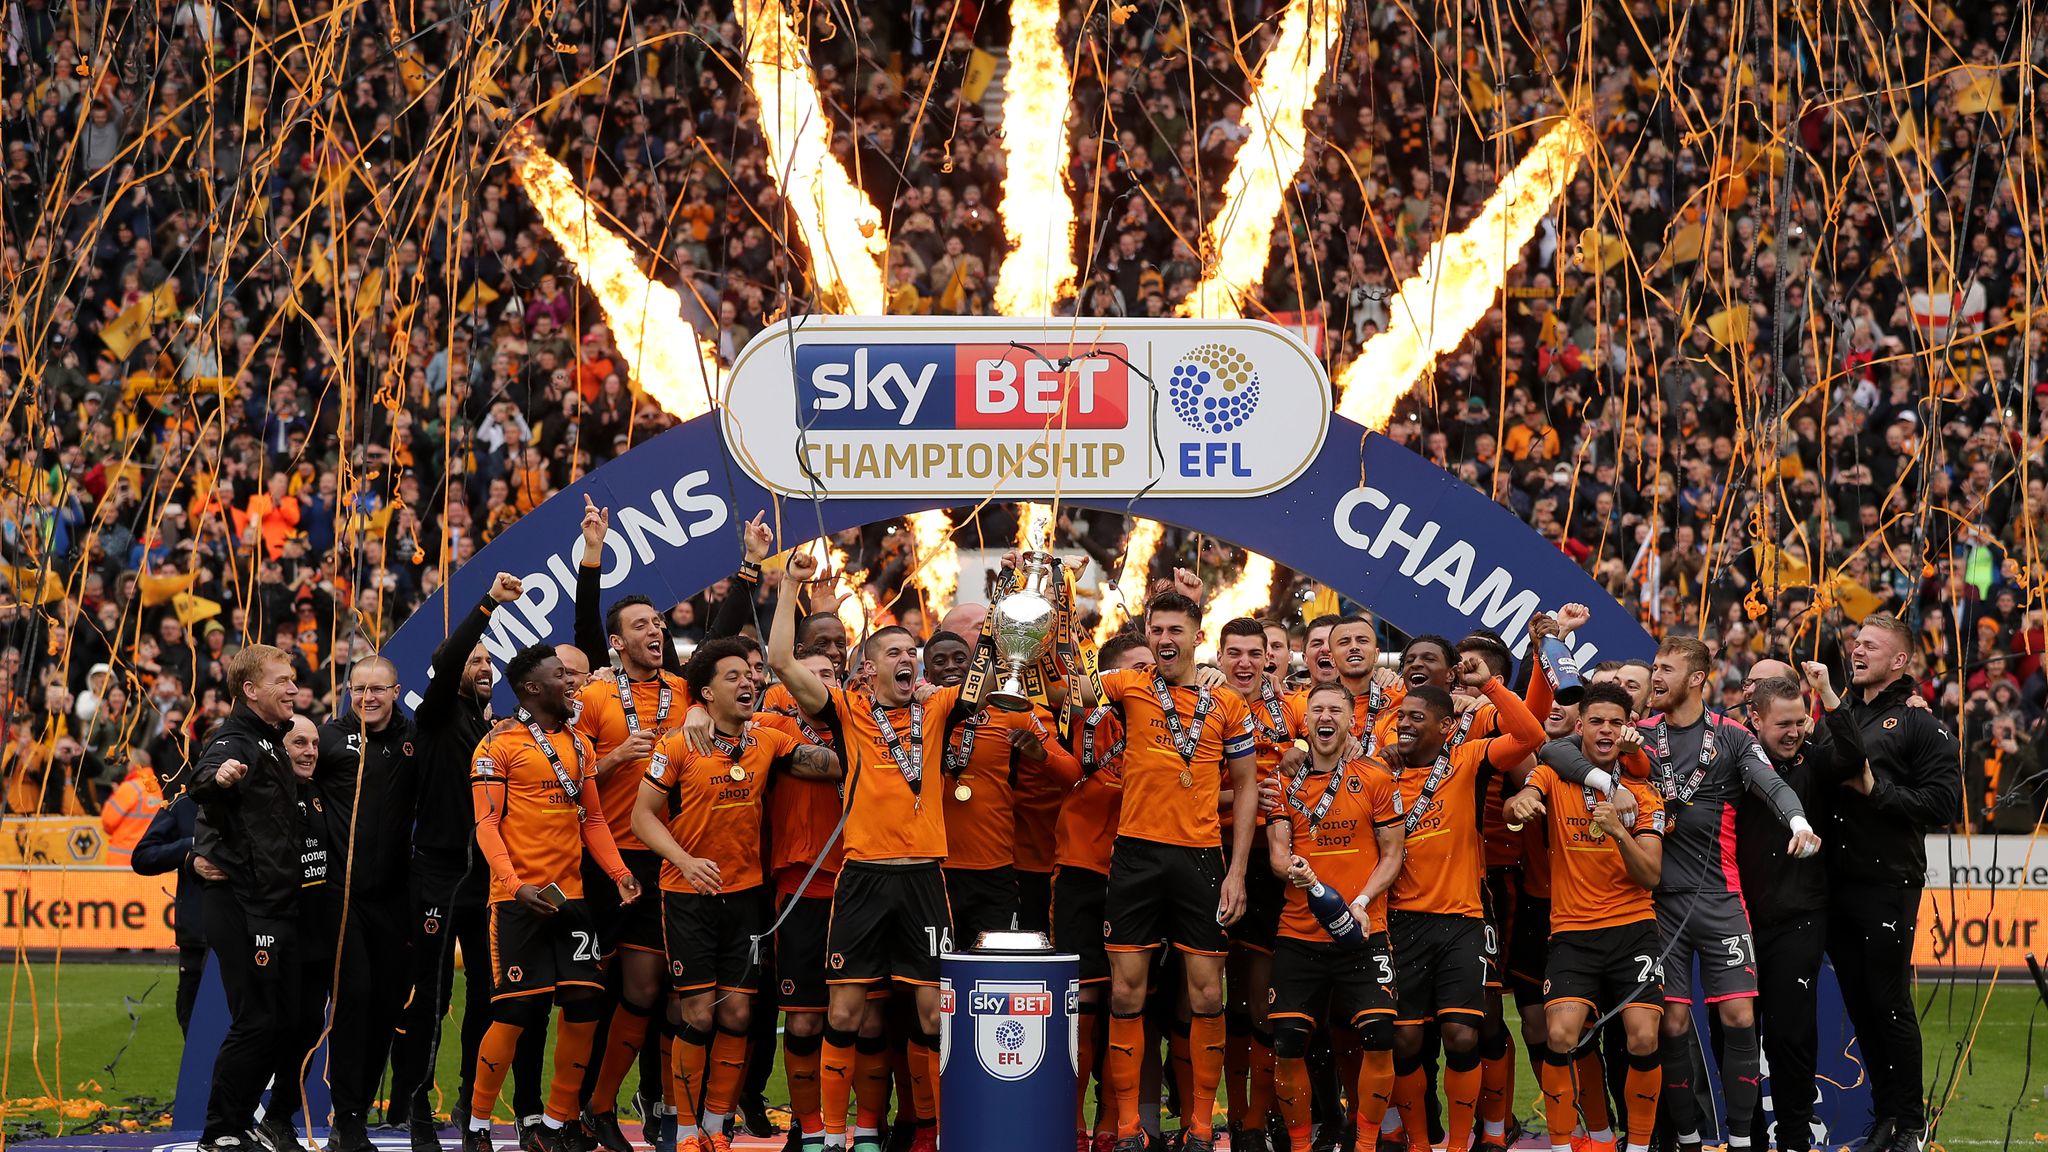 EFL live on Sky Sports: Sky Bet Championship fixtures confirmed through